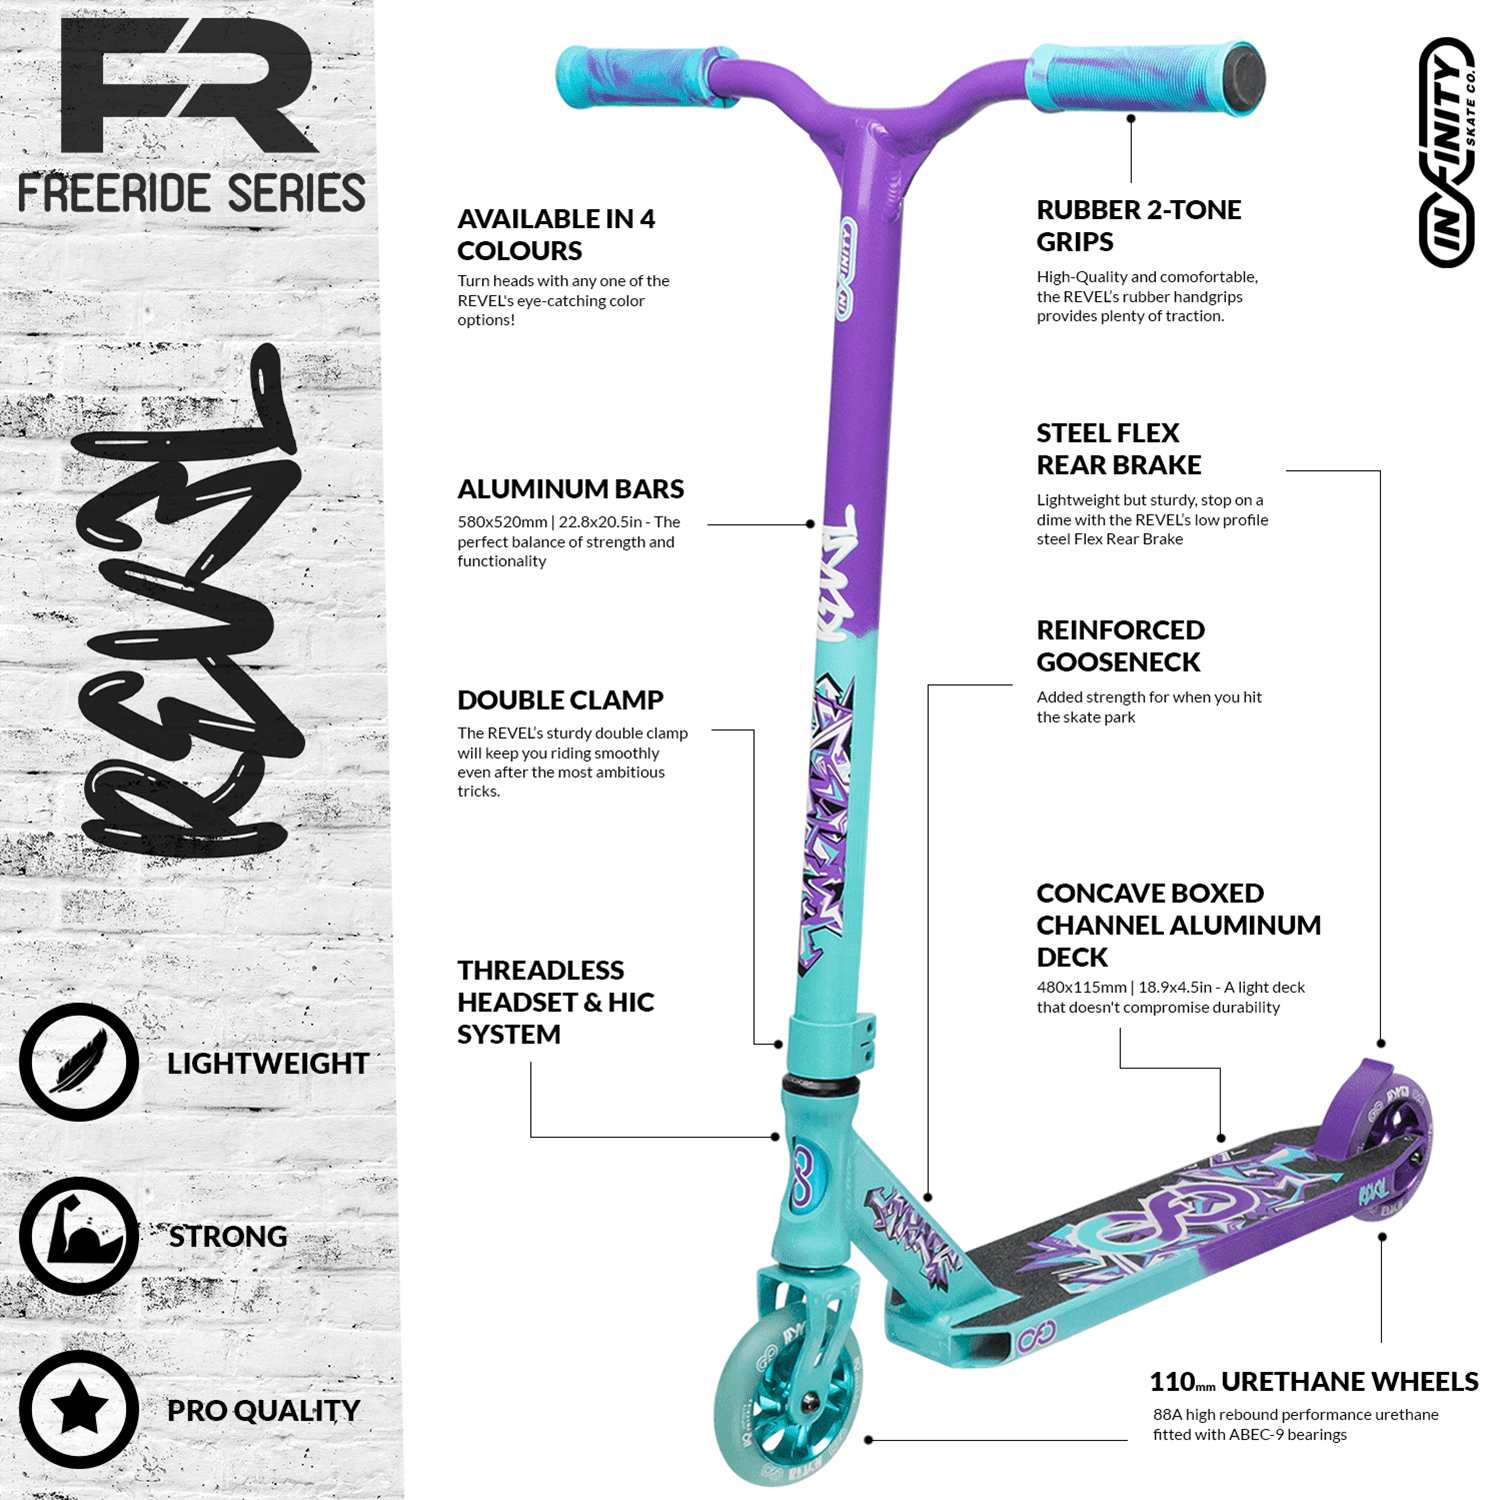 Crazy Skates Stunt Series Kick Scooter - Fun Trick Scooters for the Street  and Skate Park - Choose from the Revel, Flare or Fly scooters